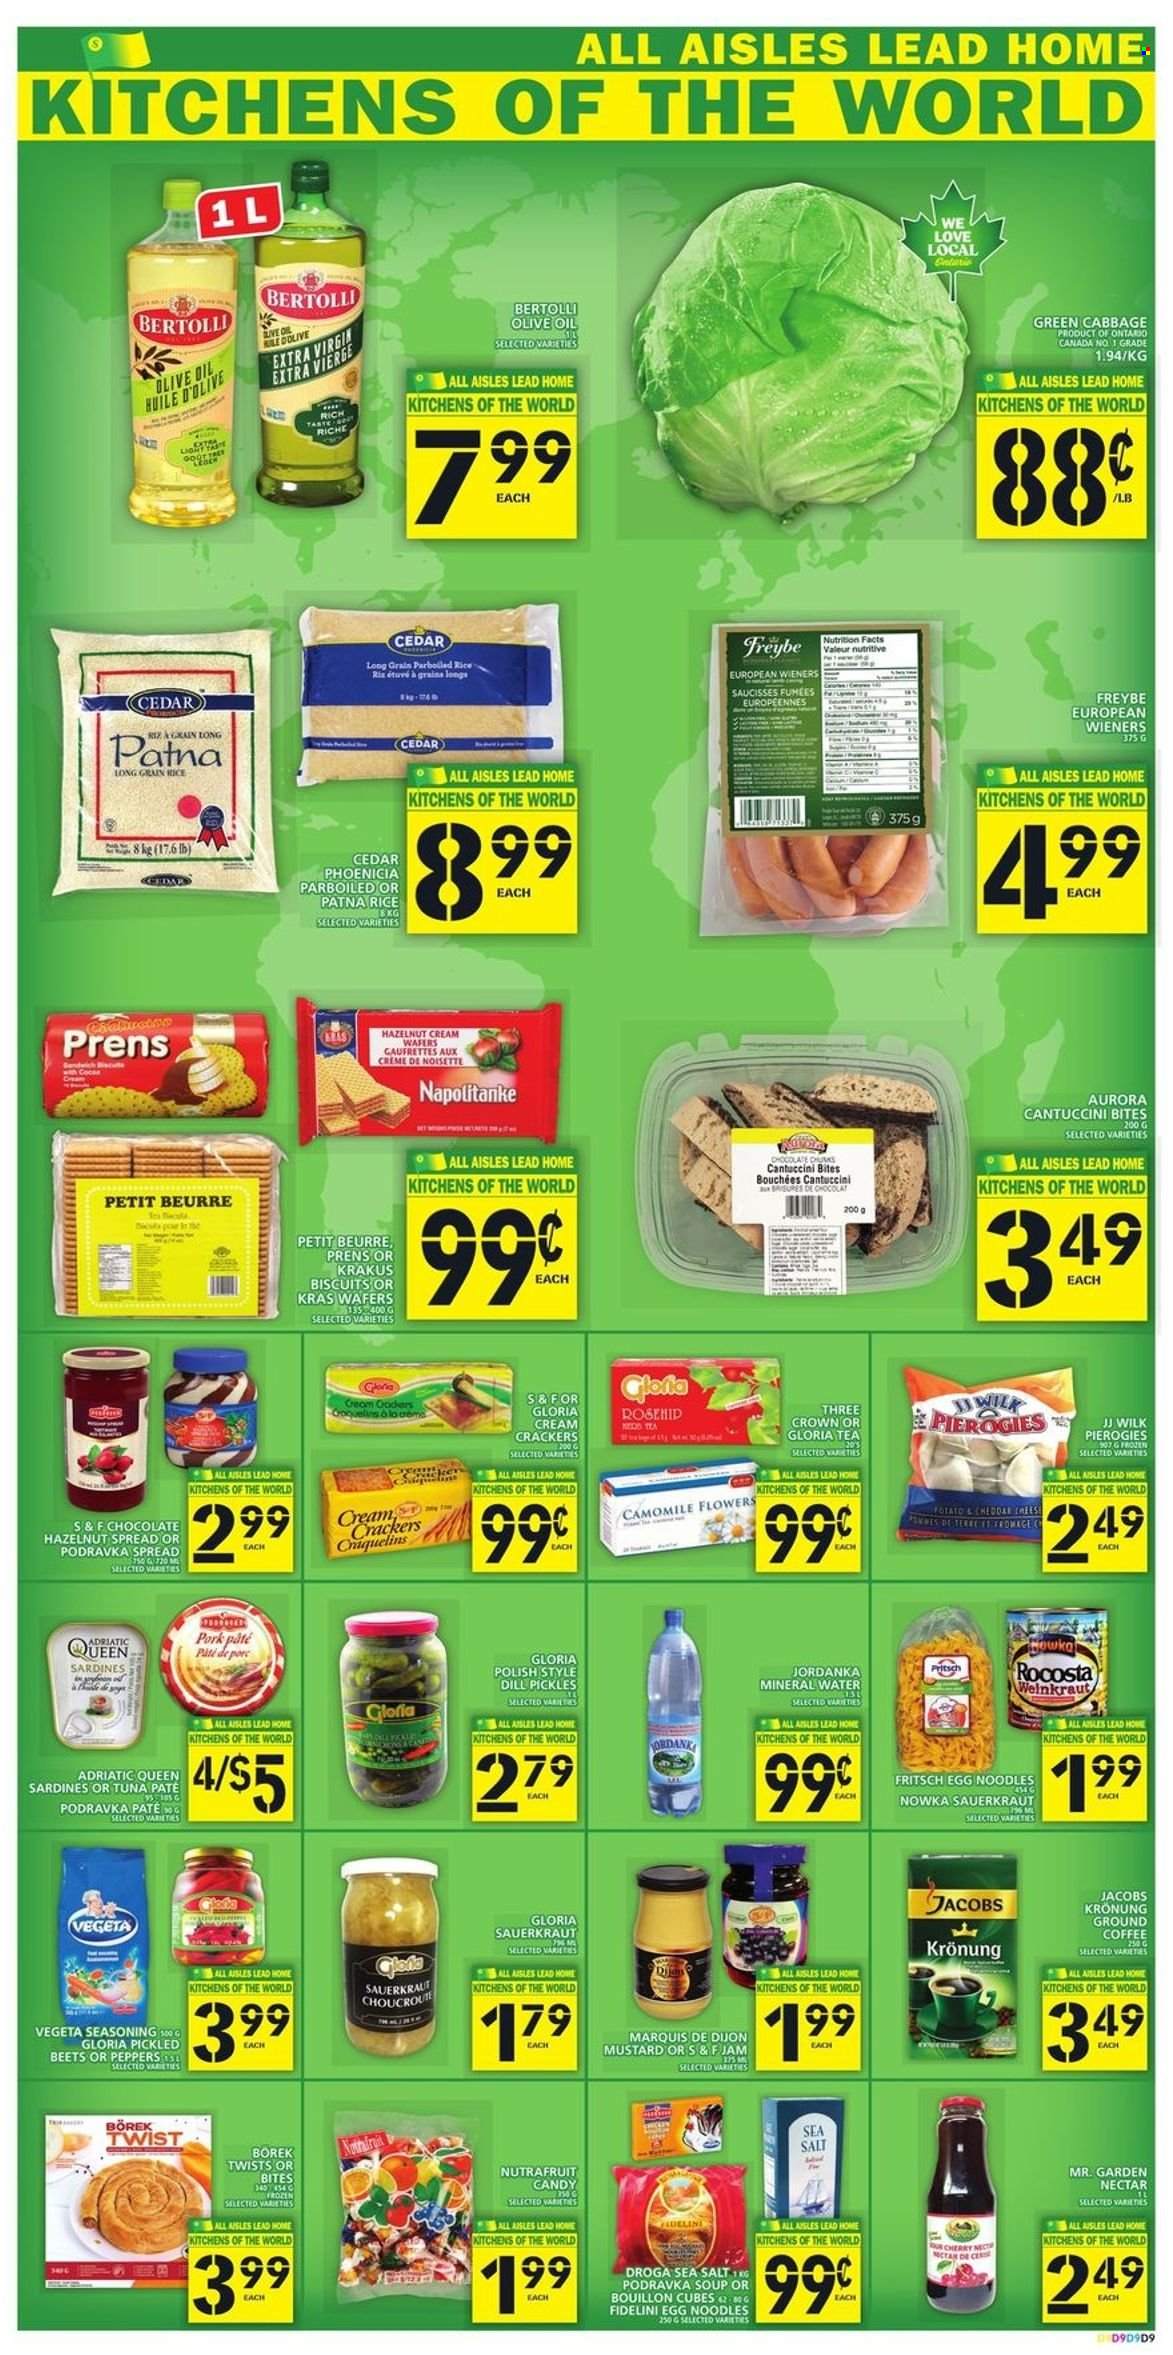 thumbnail - Food Basics Flyer - December 02, 2021 - December 08, 2021 - Sales products - cabbage, peppers, cherries, sardines, tuna, soup, noodles, Bertolli, cheese, wafers, chocolate, crackers, biscuit, bouillon, sauerkraut, pickles, rice, egg noodles, dill, spice, mustard, olive oil, oil, hazelnut spread, mineral water, tea, coffee, Jacobs, ground coffee, Jacobs Krönung, polish. Page 11.